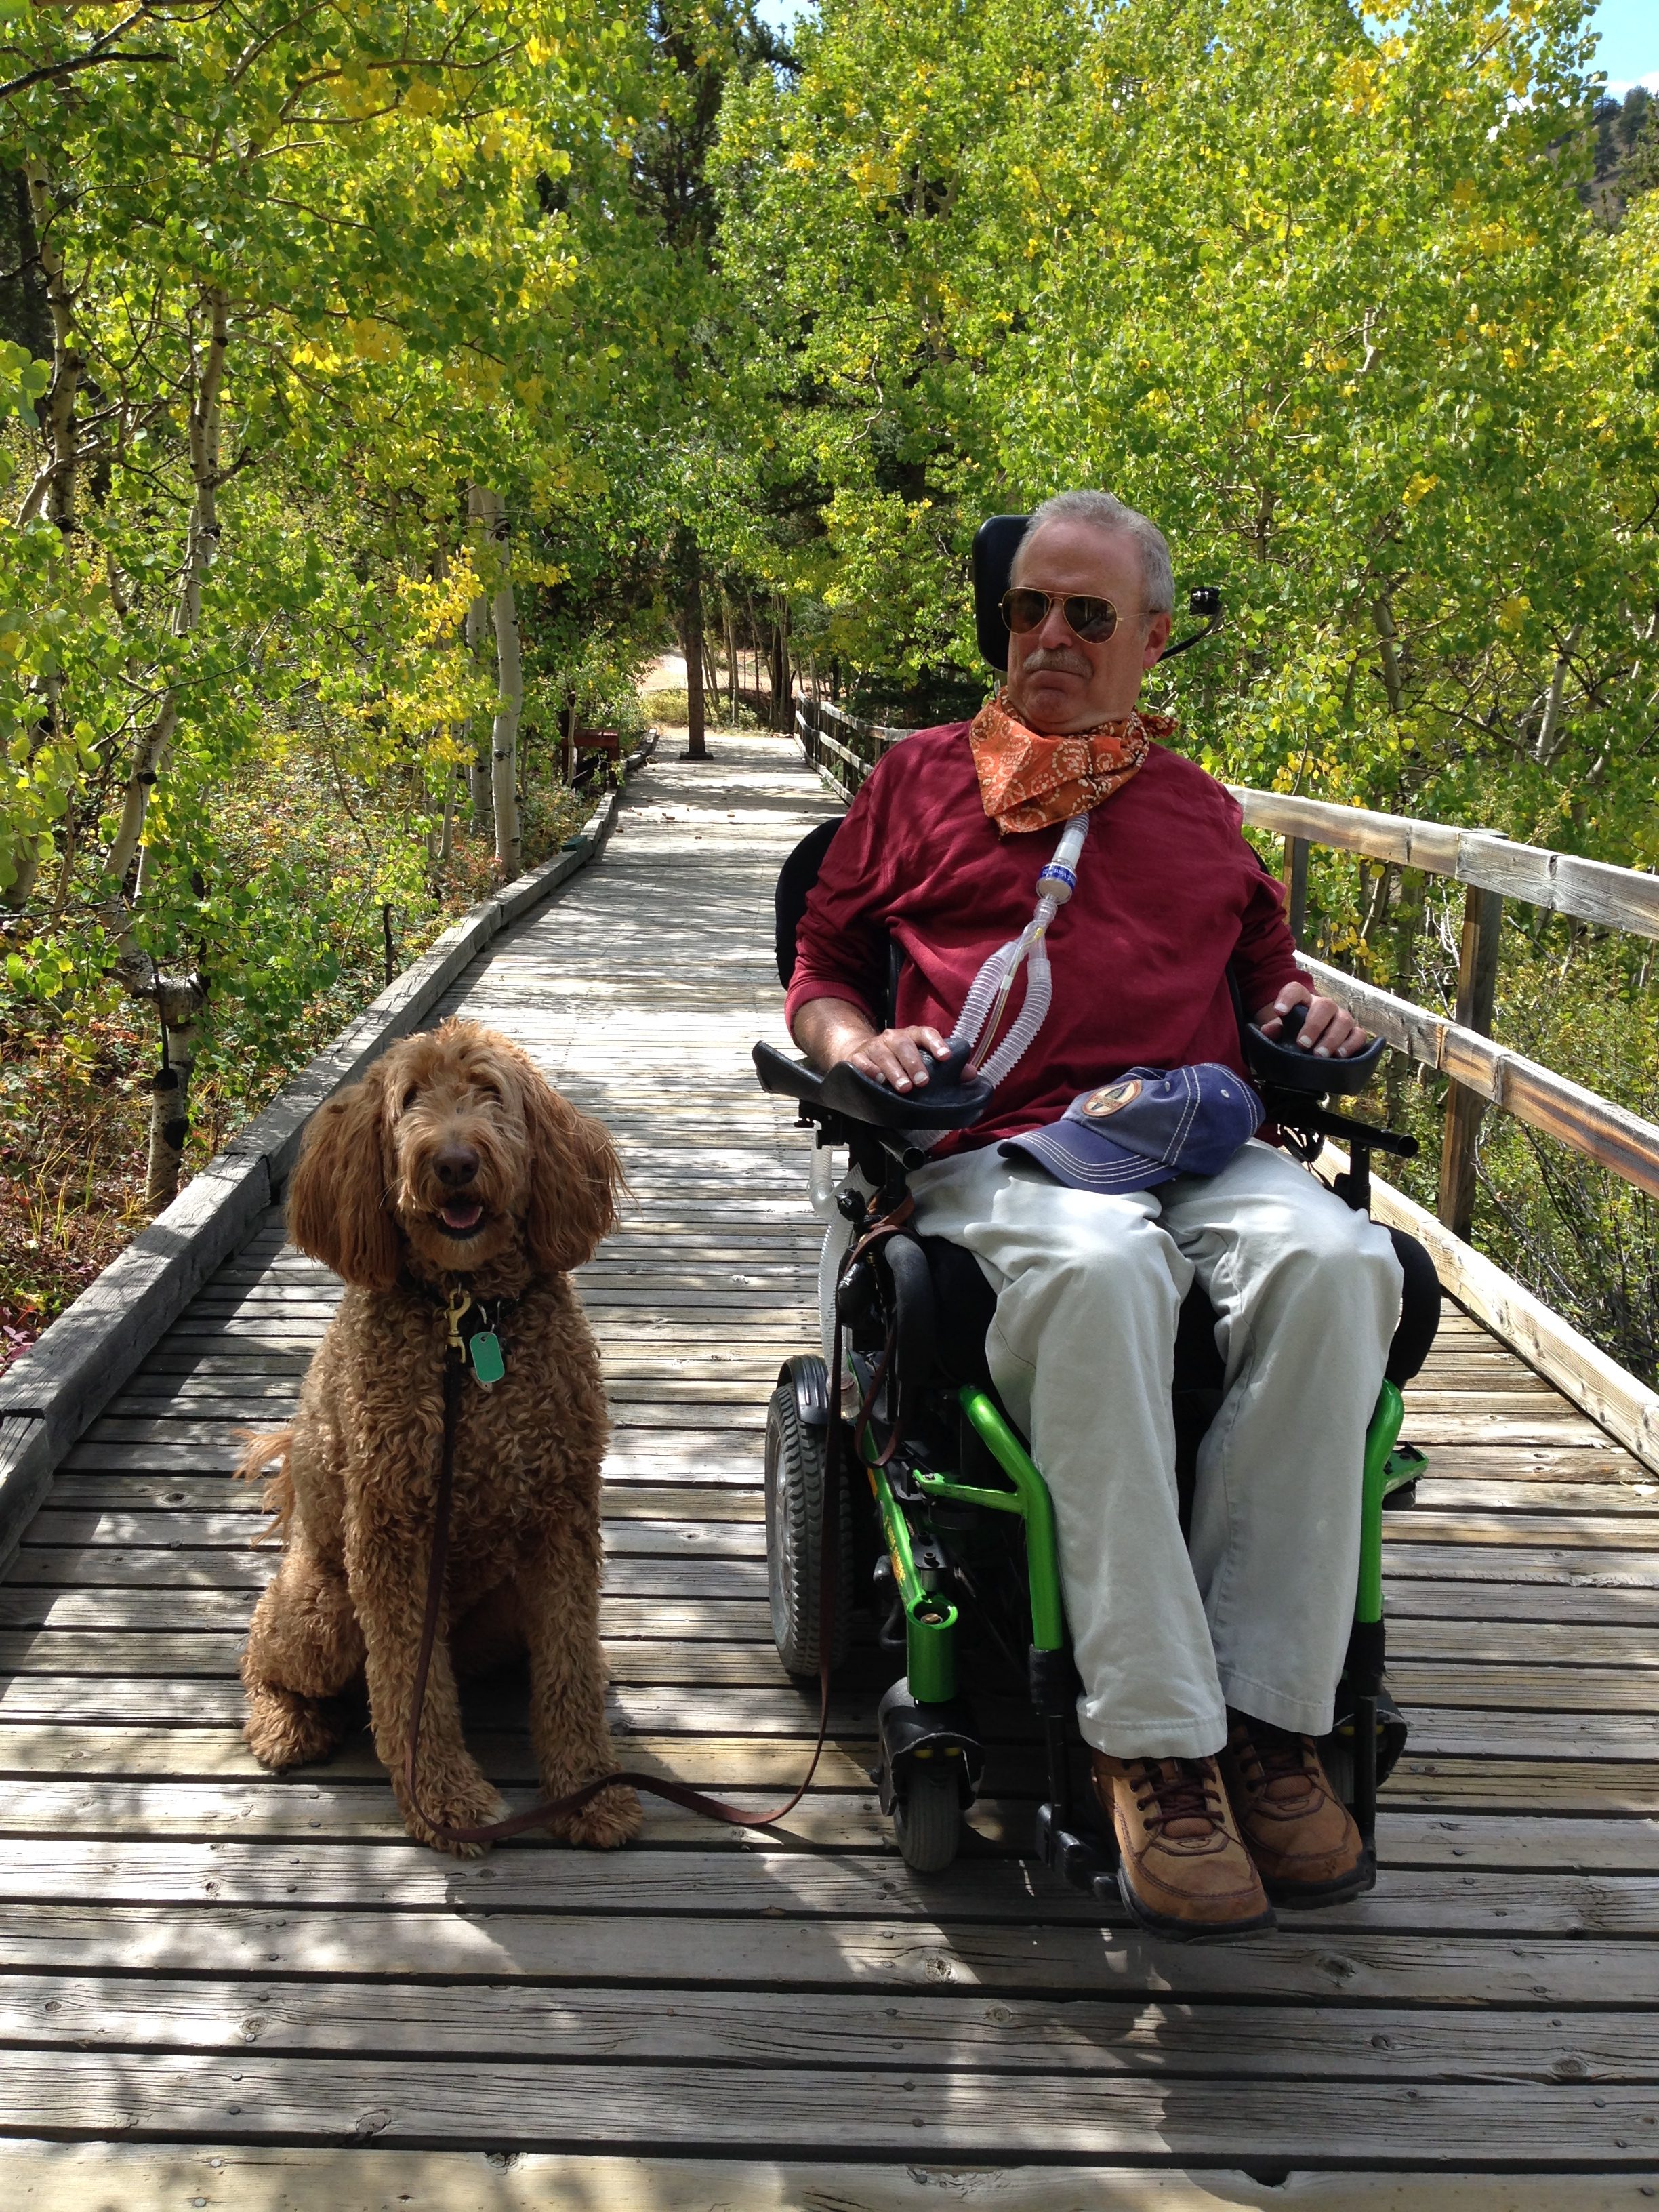 Bruce Goguen is photographed in his wheelchair beside his dog. They are sitting outdoors, surrounded by nature.